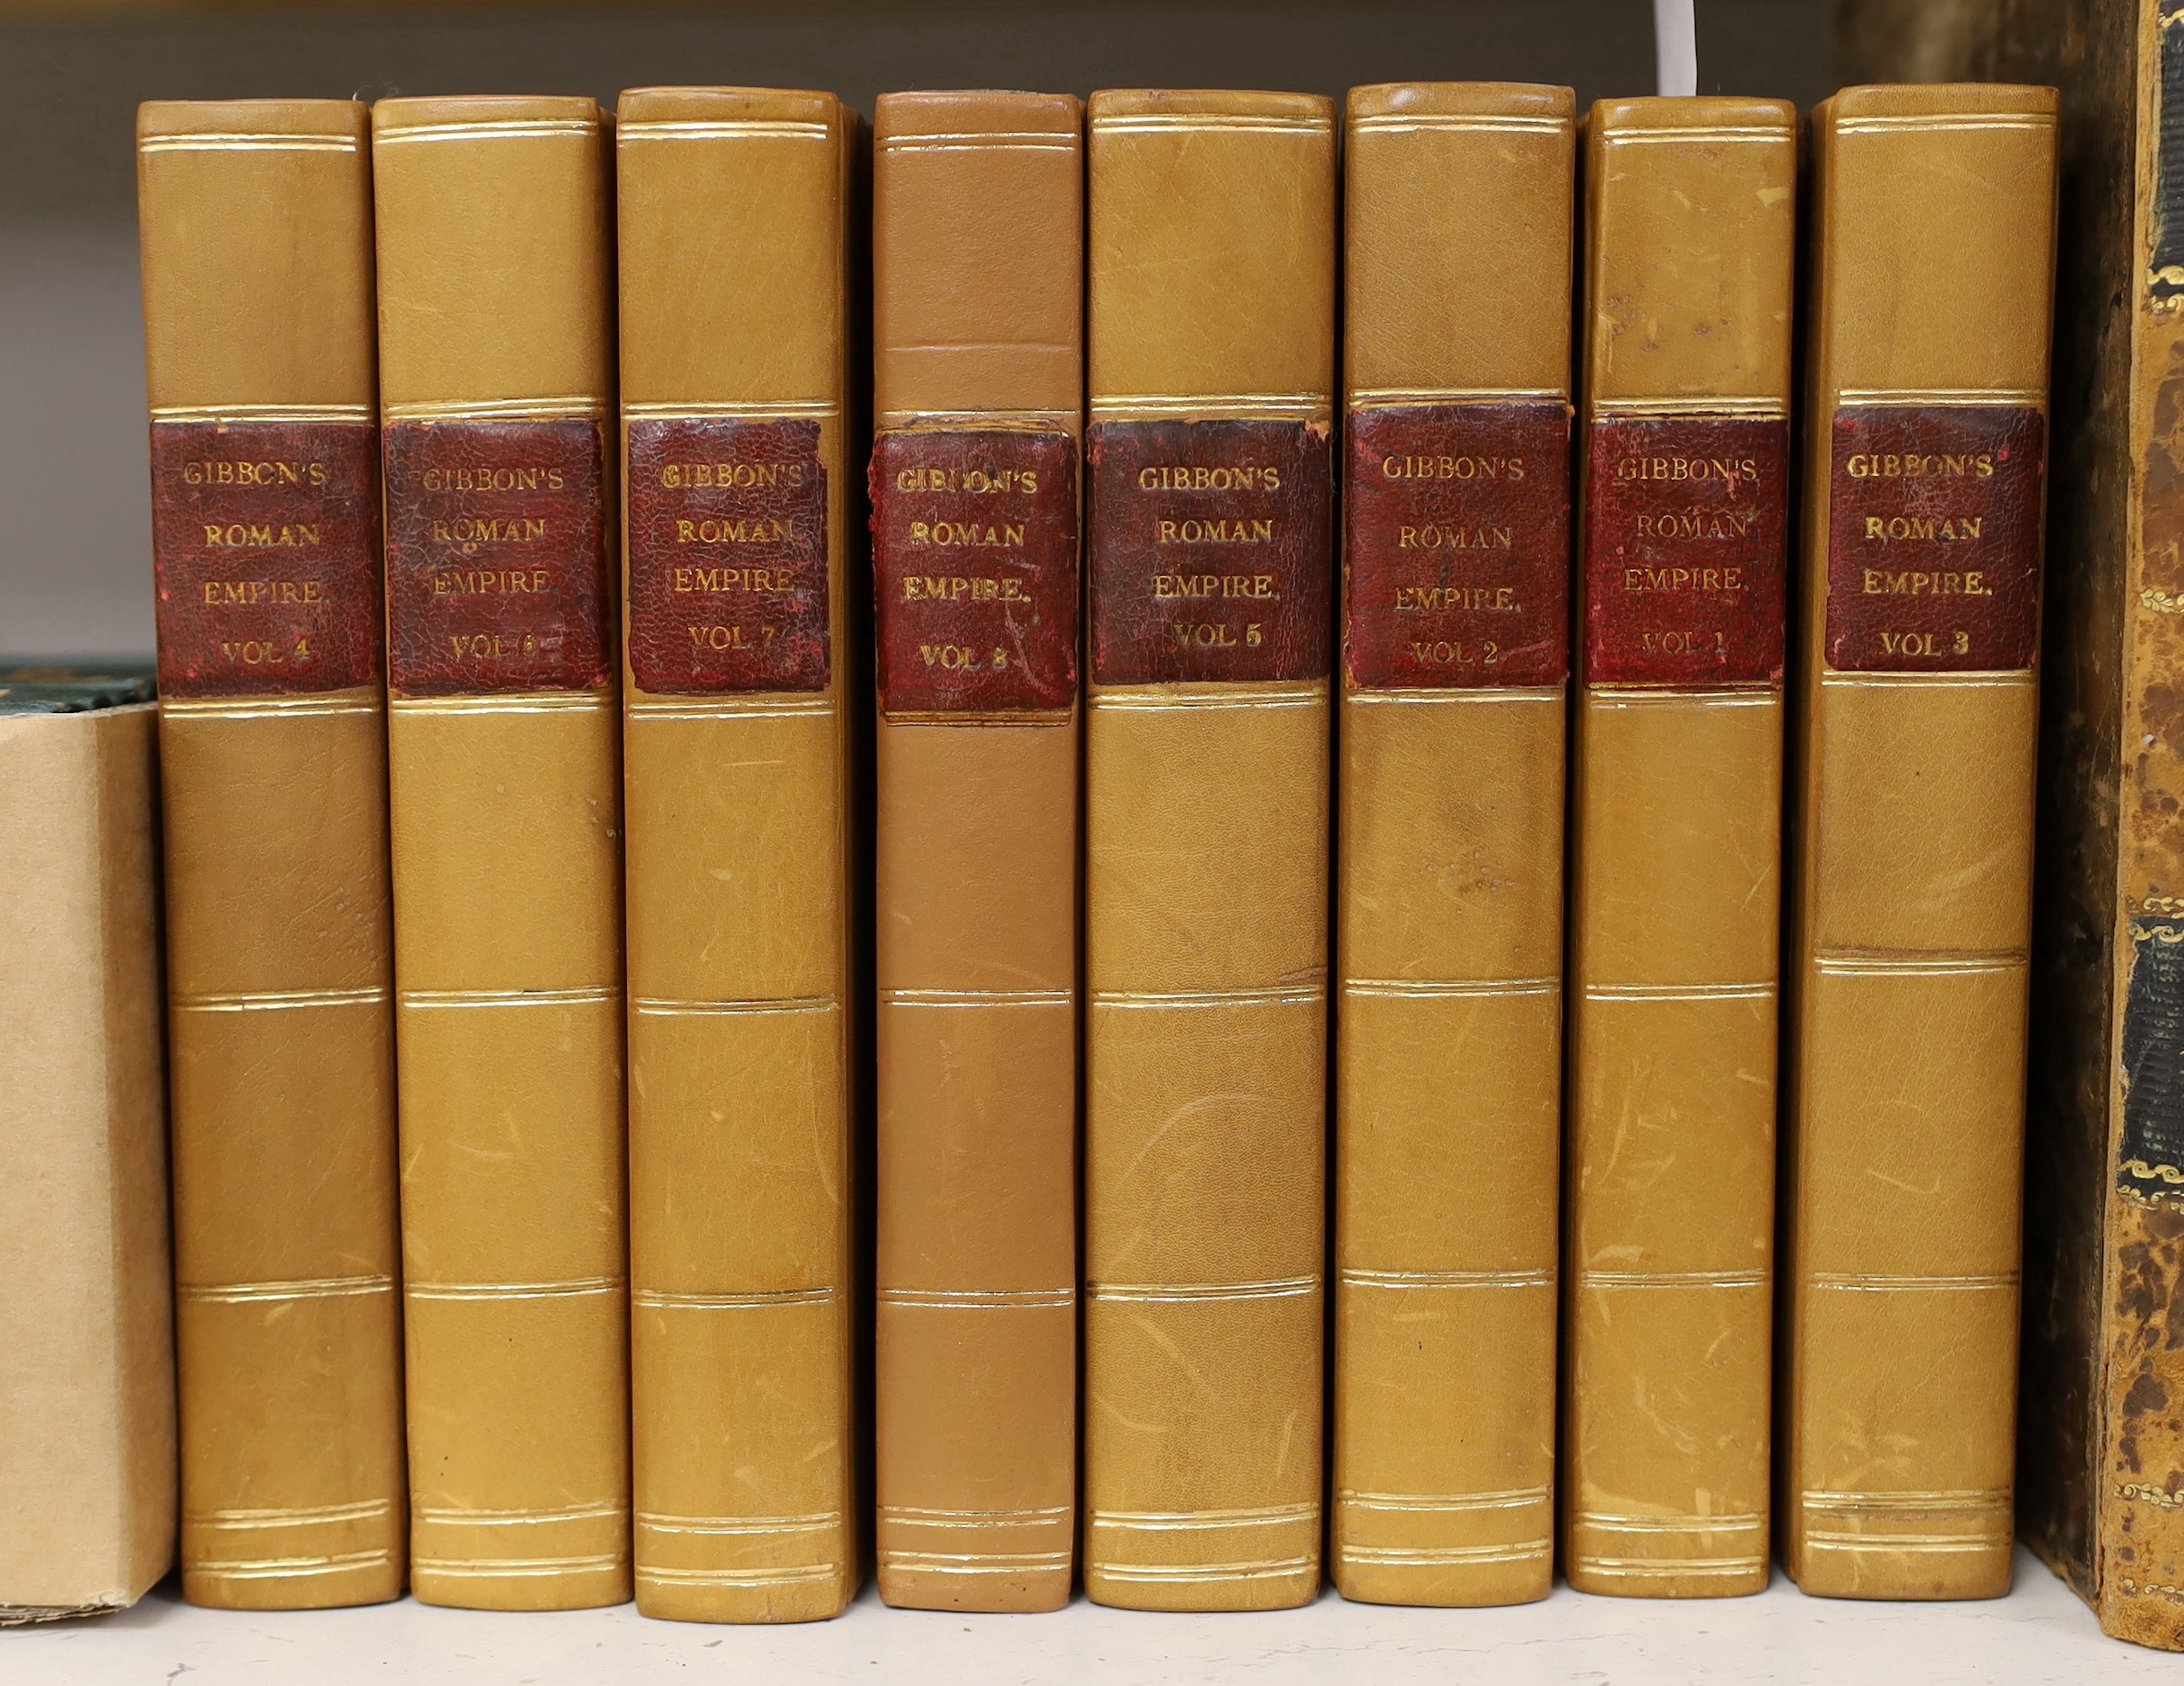 Gibbon, Edward - The History of the Decline and Fall of the Roman Empire. (new edition), 8 vols. portrait and 3 folded maps; old calf rebacked with gilt ruled spines and original maroon labels, 1825